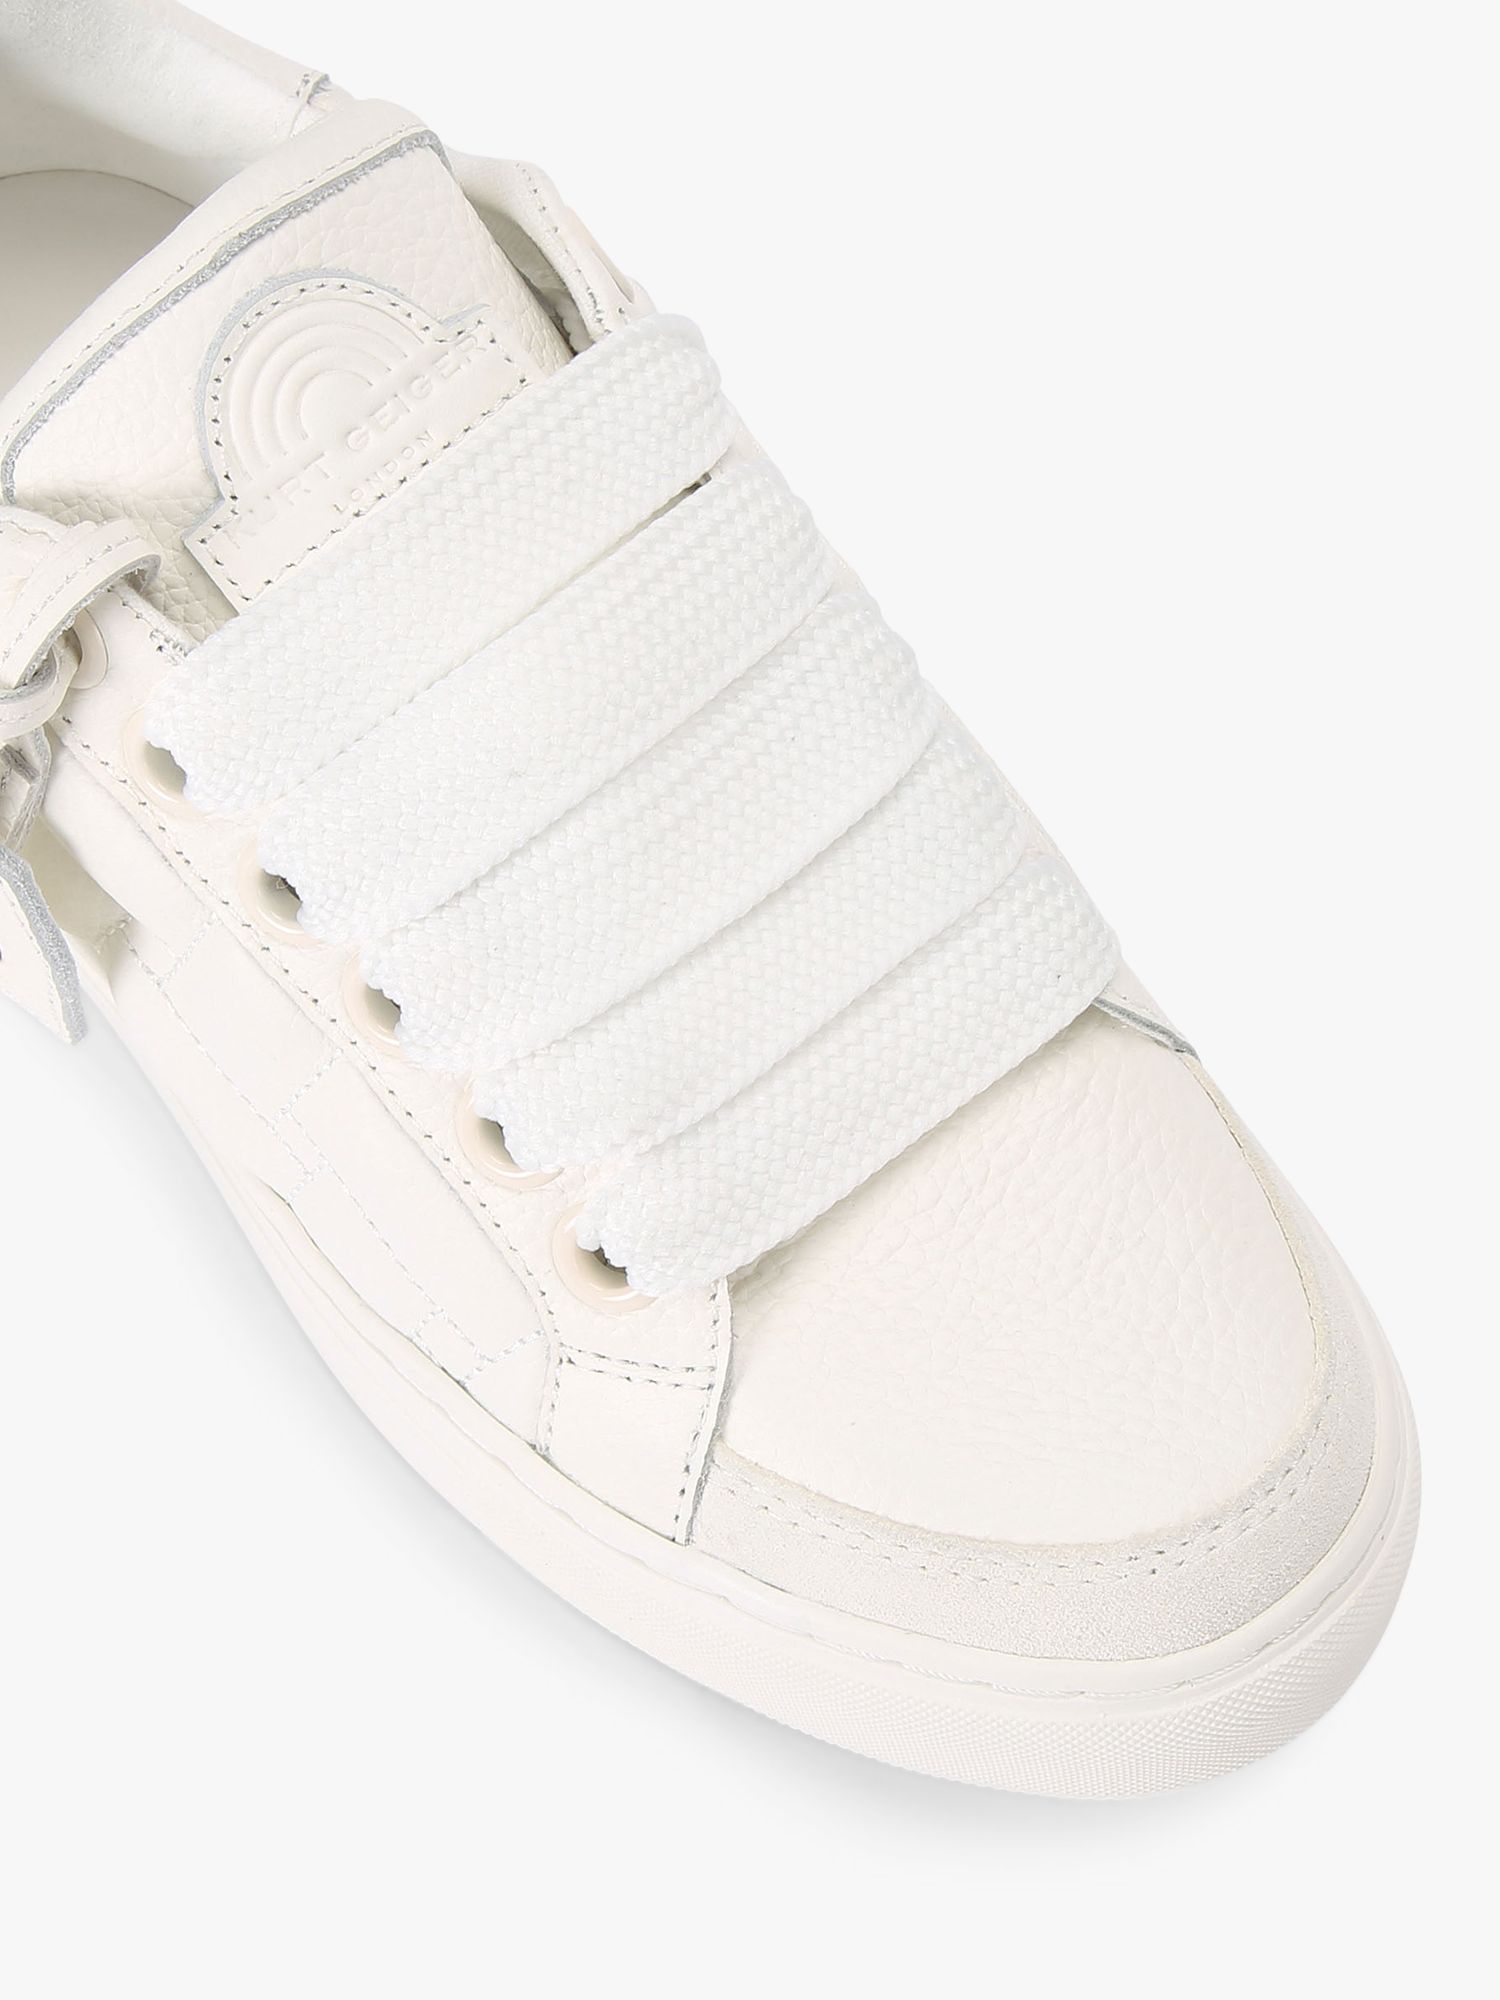 Buy Kurt Geiger London Southbank Leather Trainers Online at johnlewis.com